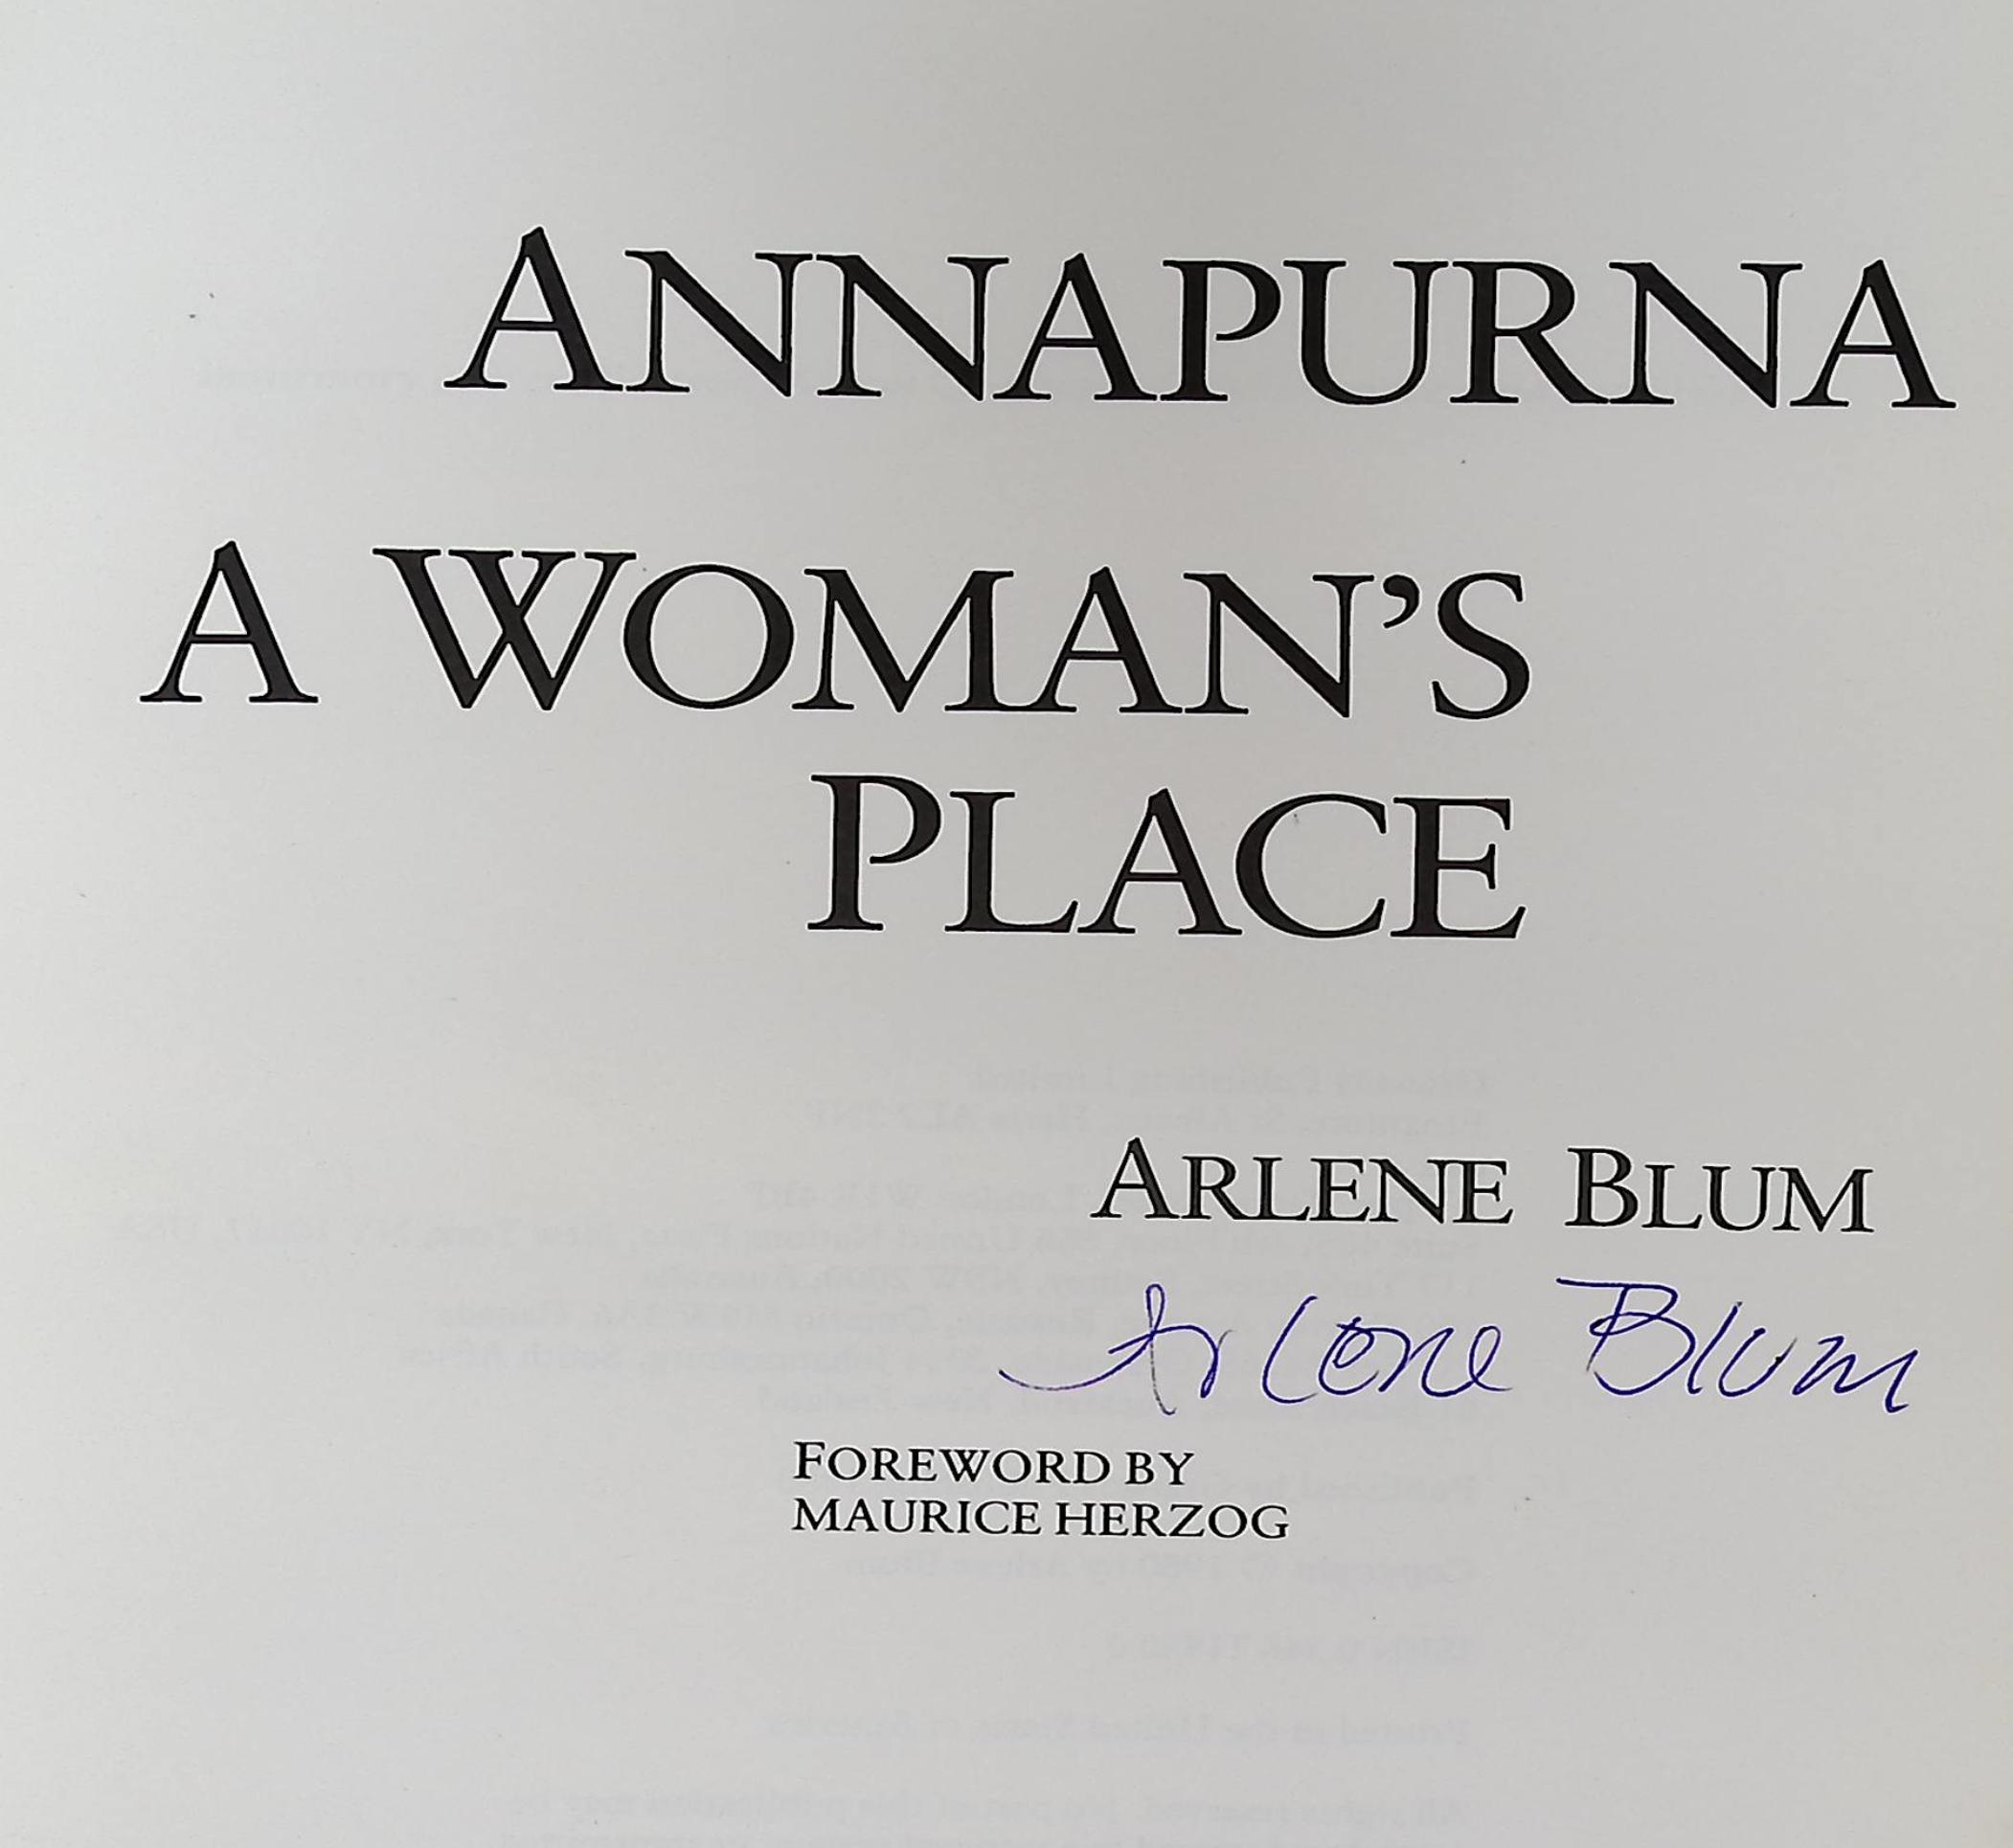 Annapurna. A Woman's Place. The Dramatic Story of the First Women's Ascent of One of the World's Highest Peaks. Signed copy.